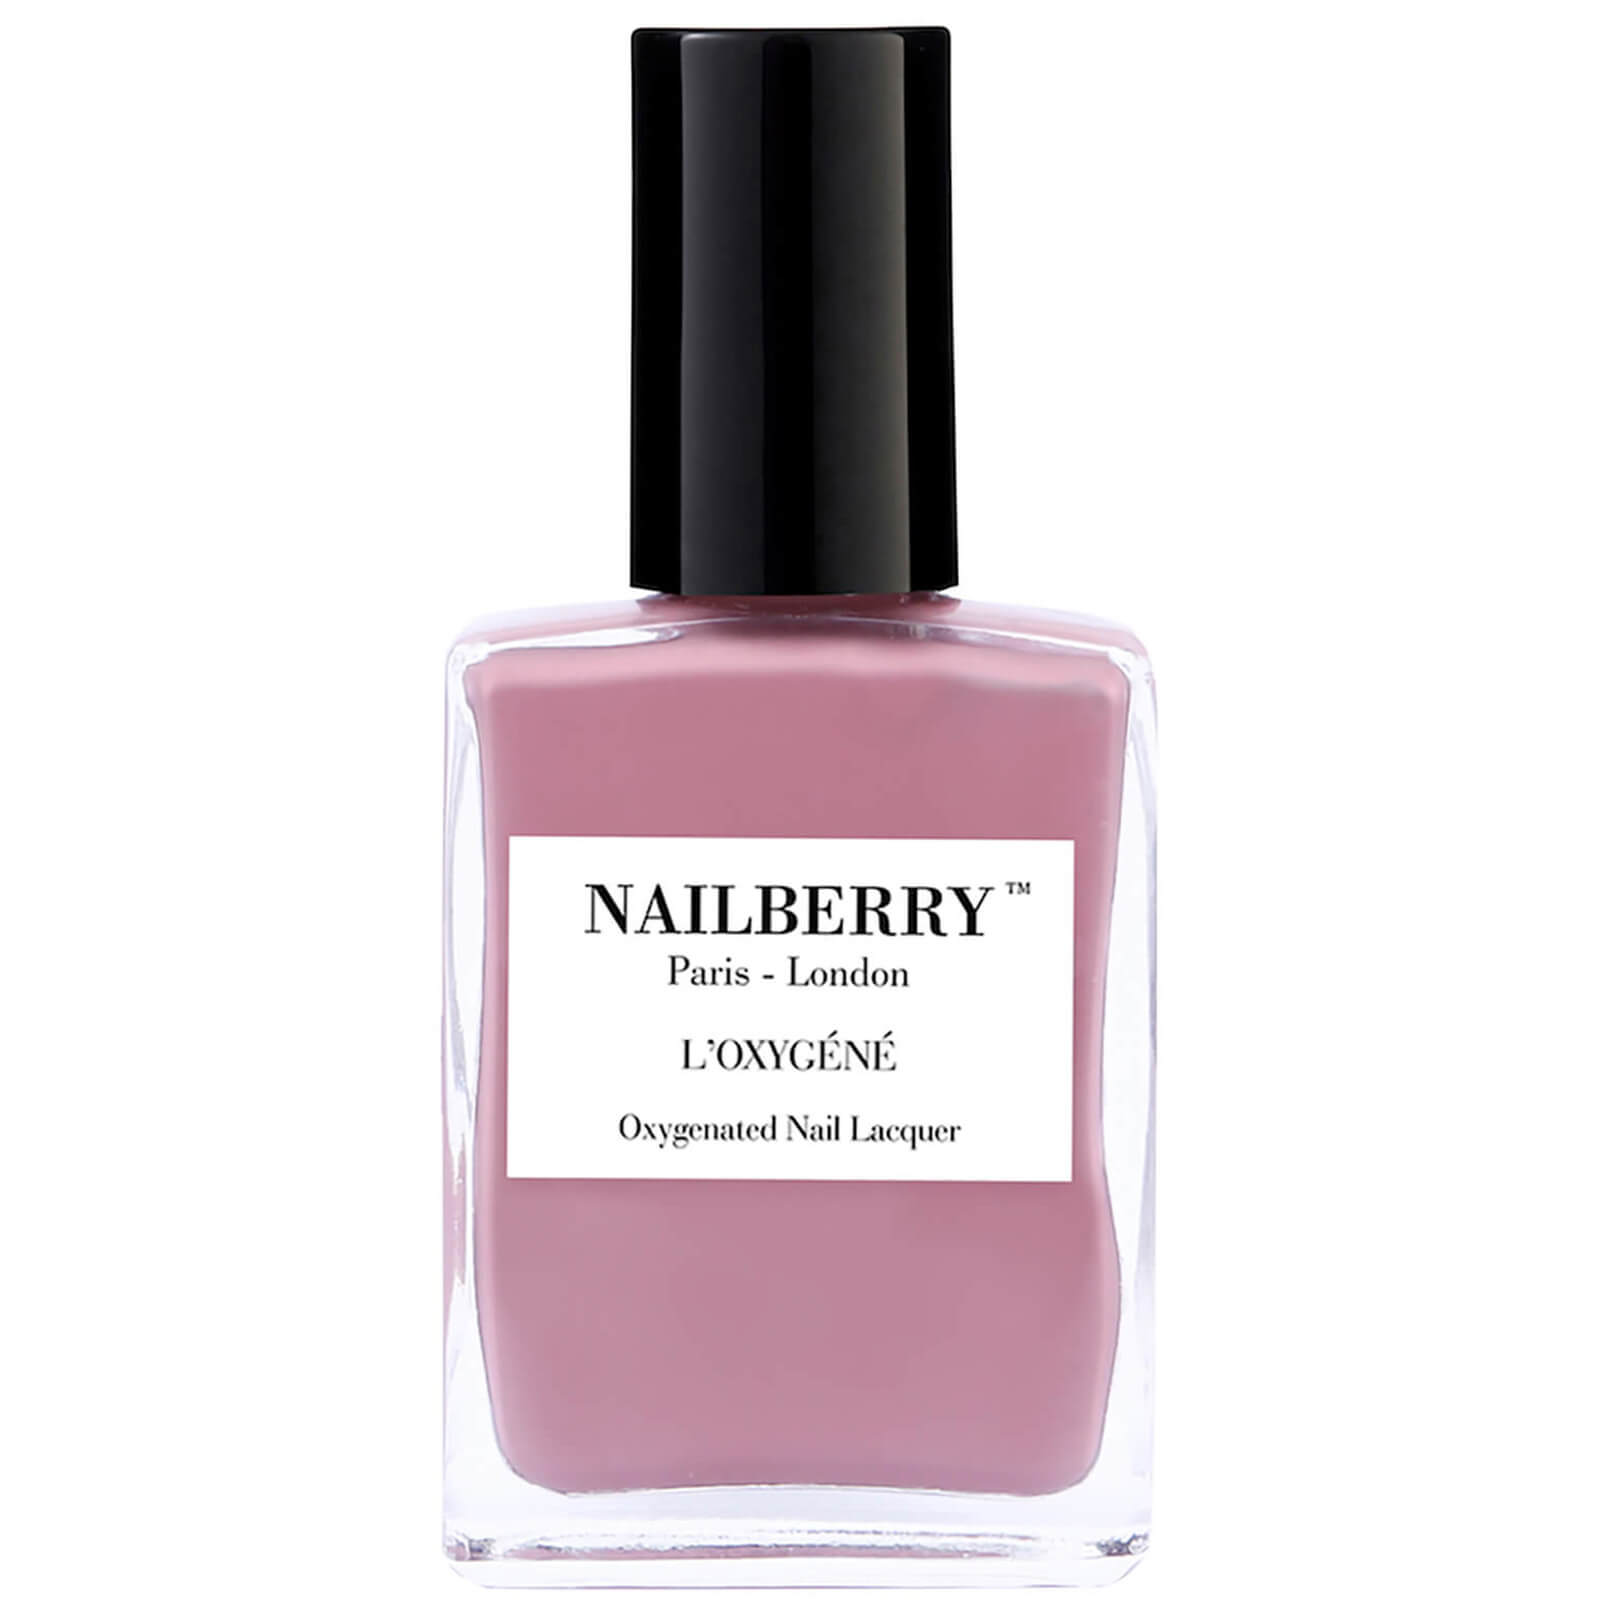 Image of Nailberry L'Oxygene Nail Lacquer Love Me Tender